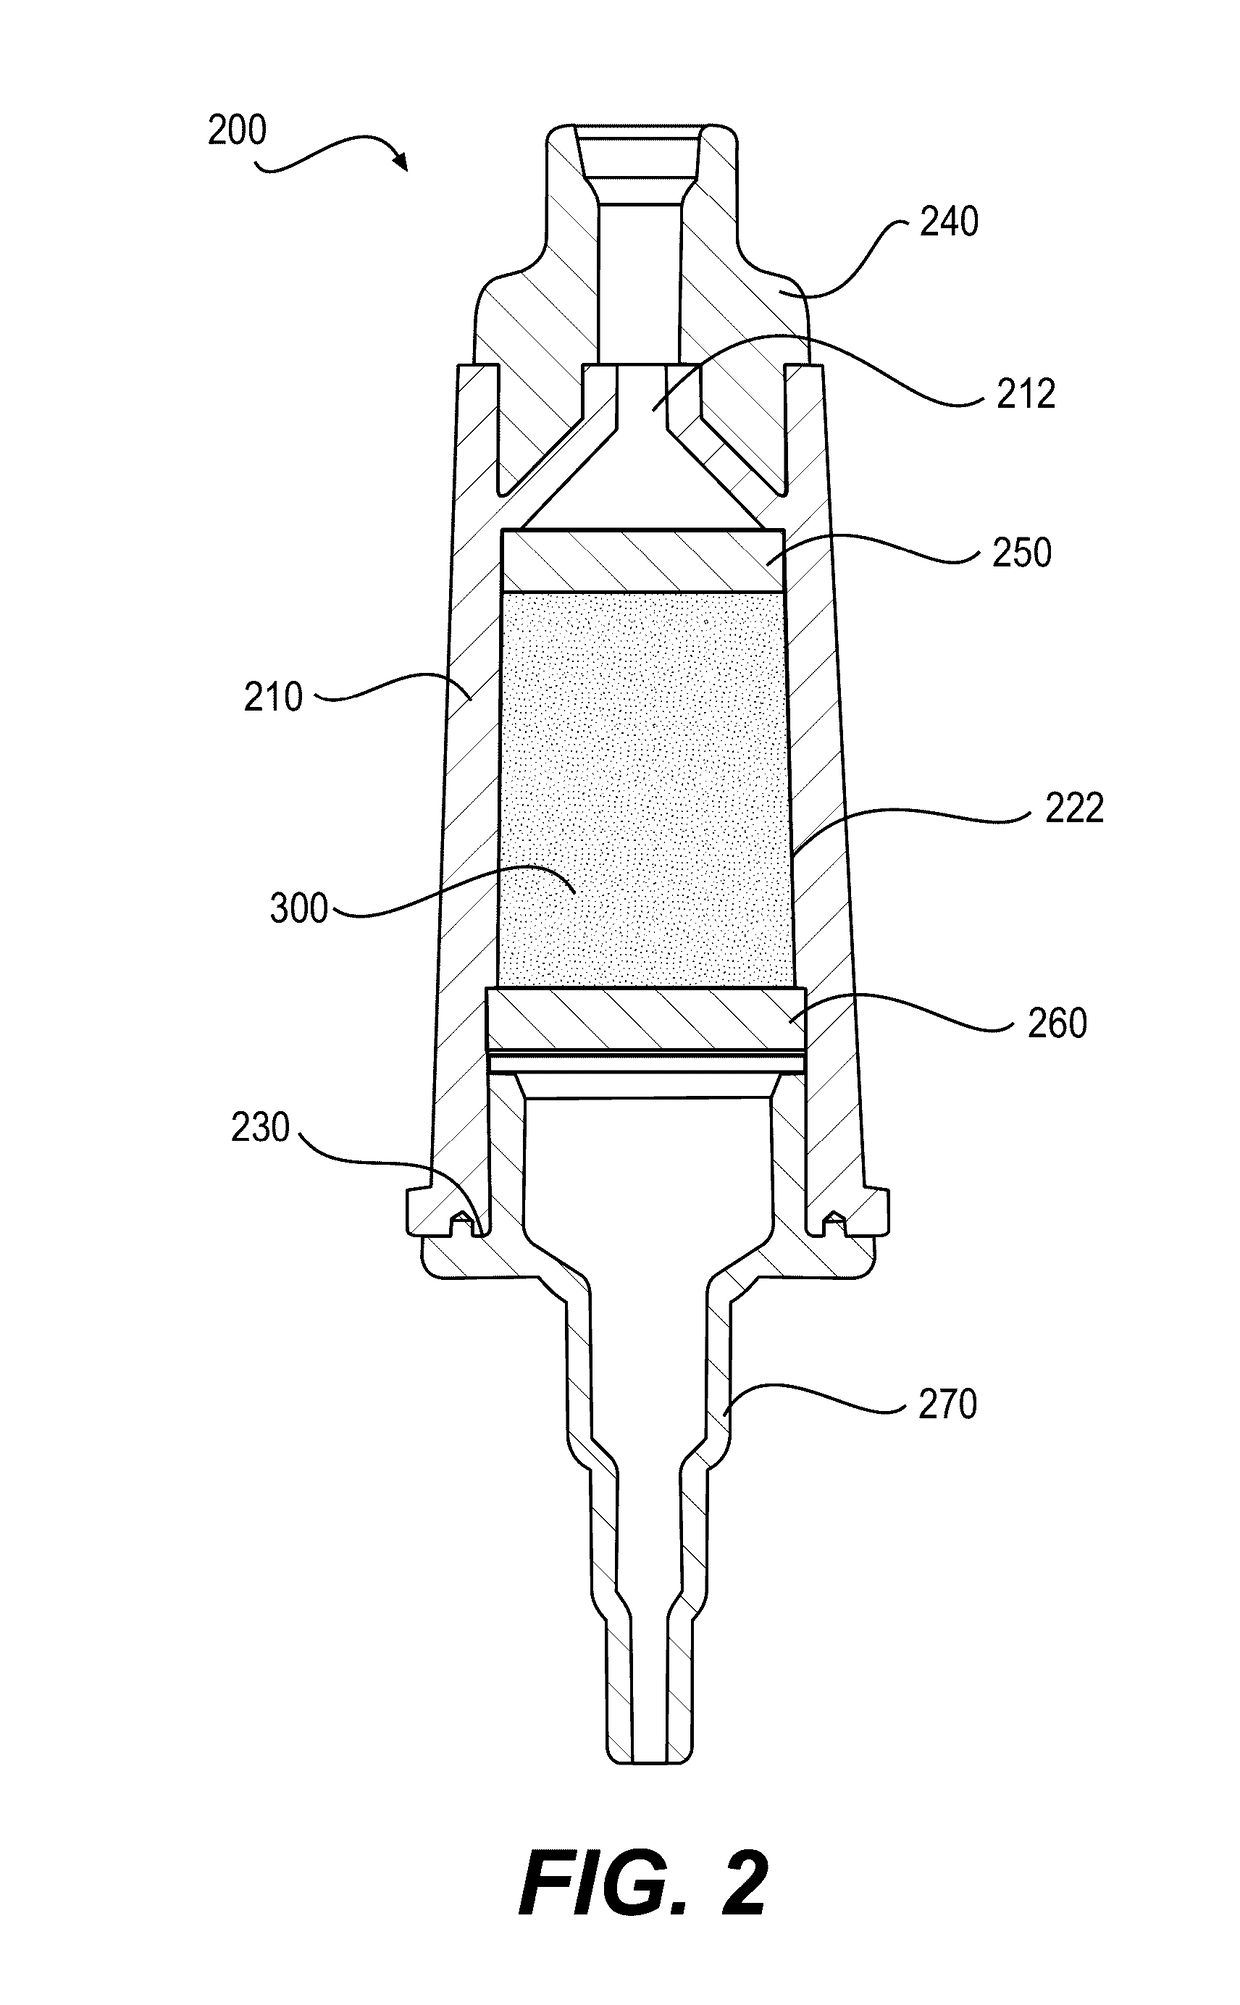 Enteral feeding device and related methods of use